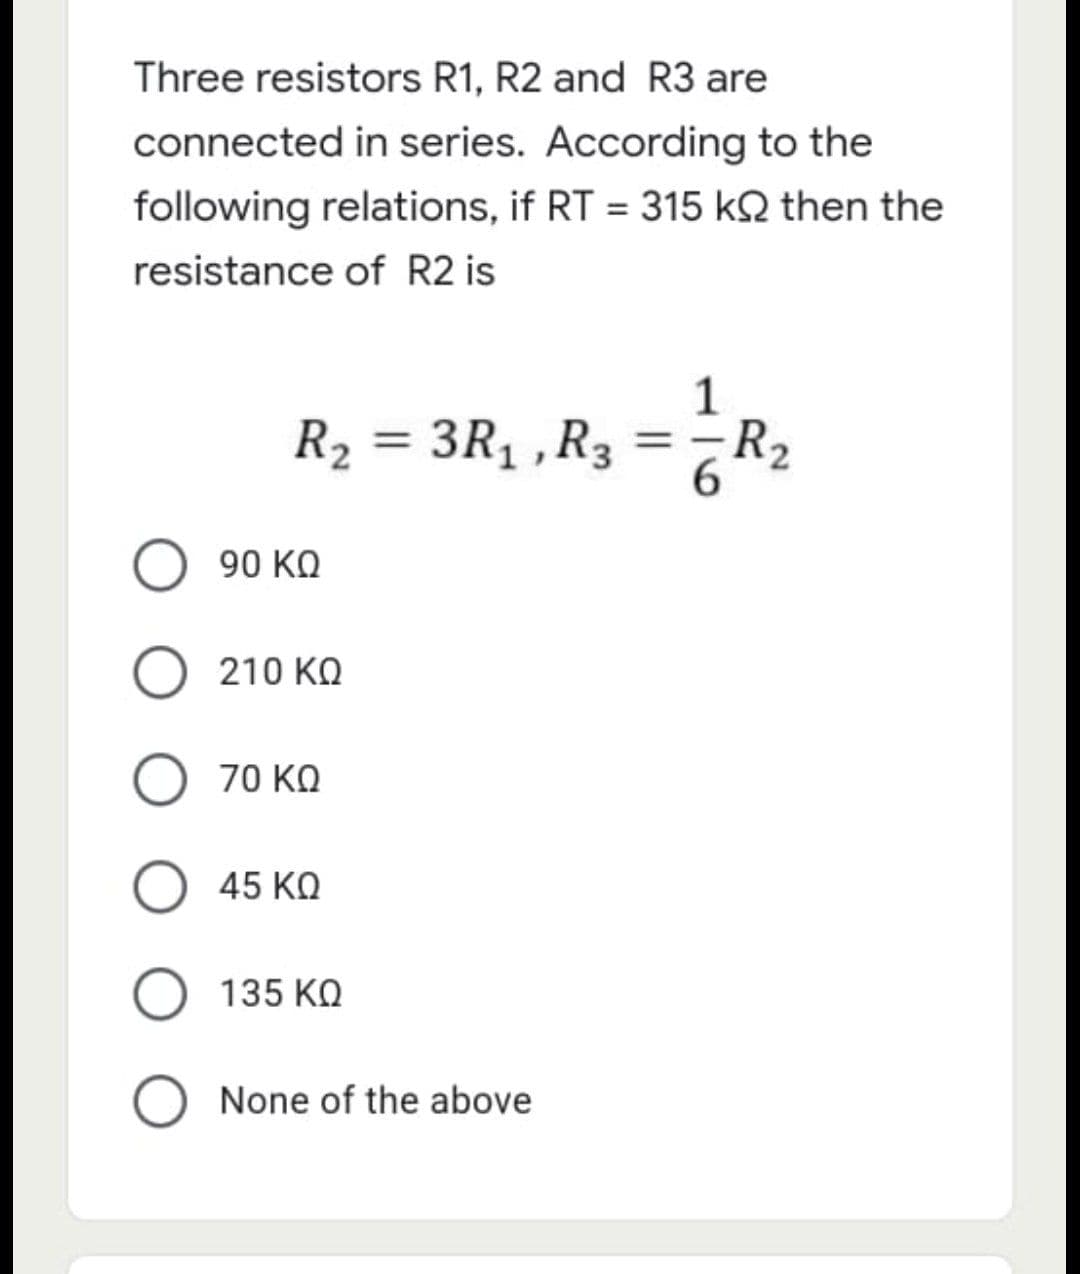 Three resistors R1, R2 and R3 are
connected in series. According to the
following relations, if RT = 315 KQ then the
resistance of R2 is
1
R₂
3R₁, R3
=
90 ΚΩ
Ο 210 ΚΩ
70 ΚΩ
45 ΚΩ
135 ΚΩ
O None of the above
=